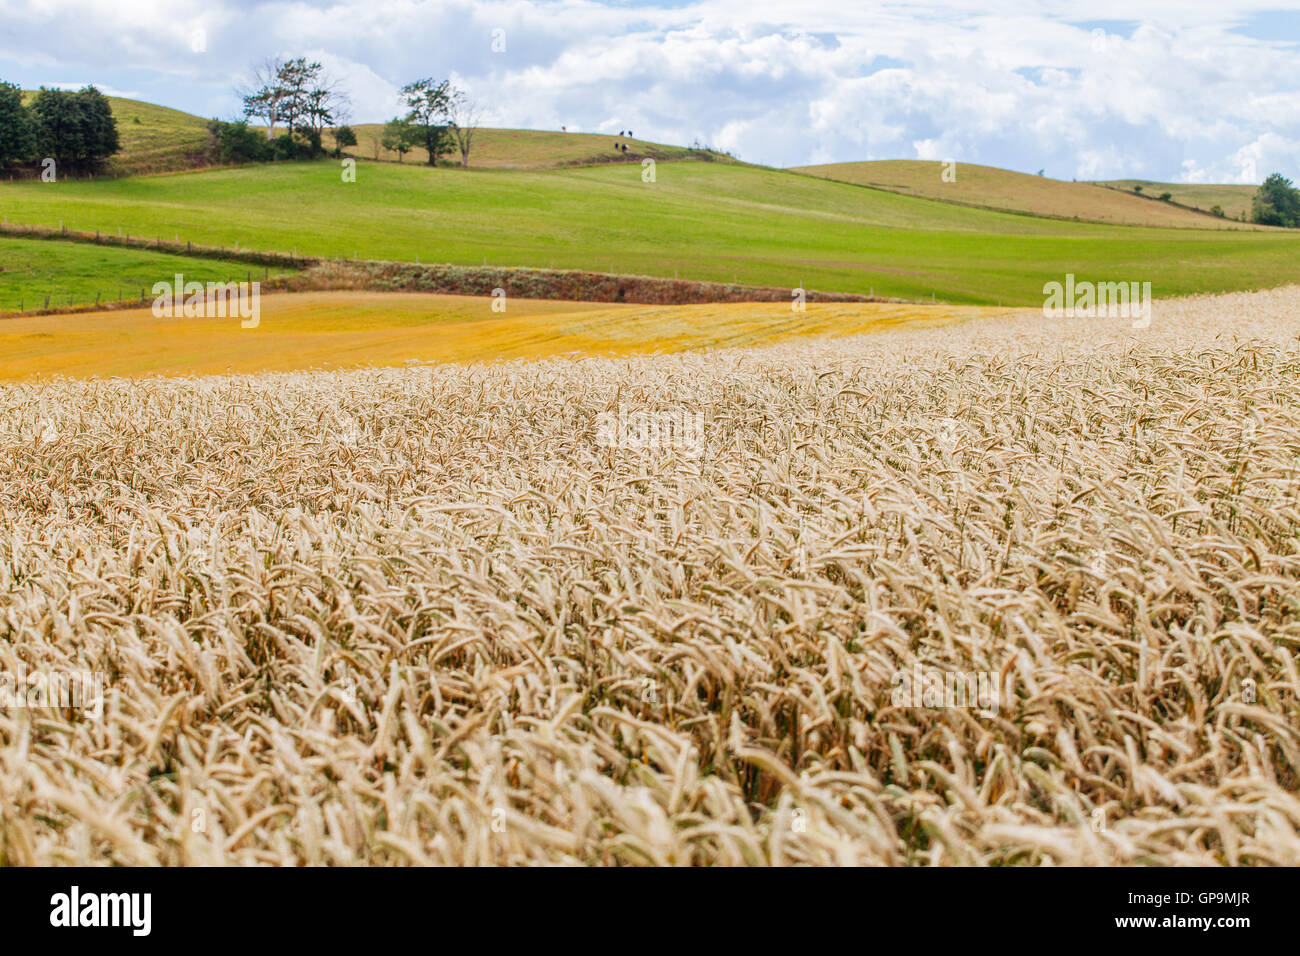 A view of the Skåne landscape and its wheat fields Stock Photo